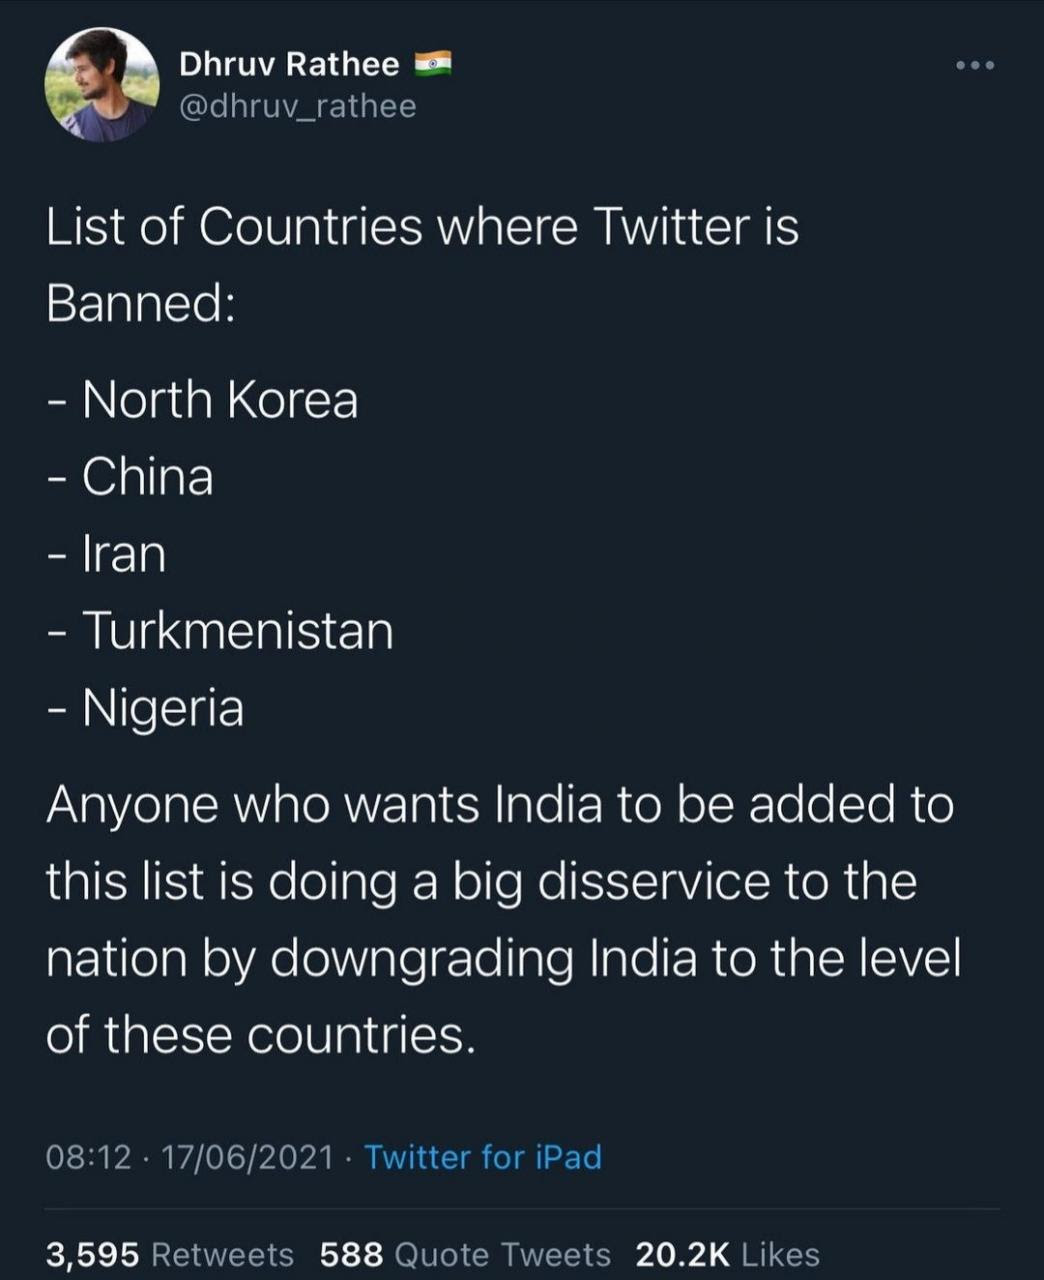 Indian YouTuber belittles Nigeria as he says countries where Twitter is banned are a "downgrade"